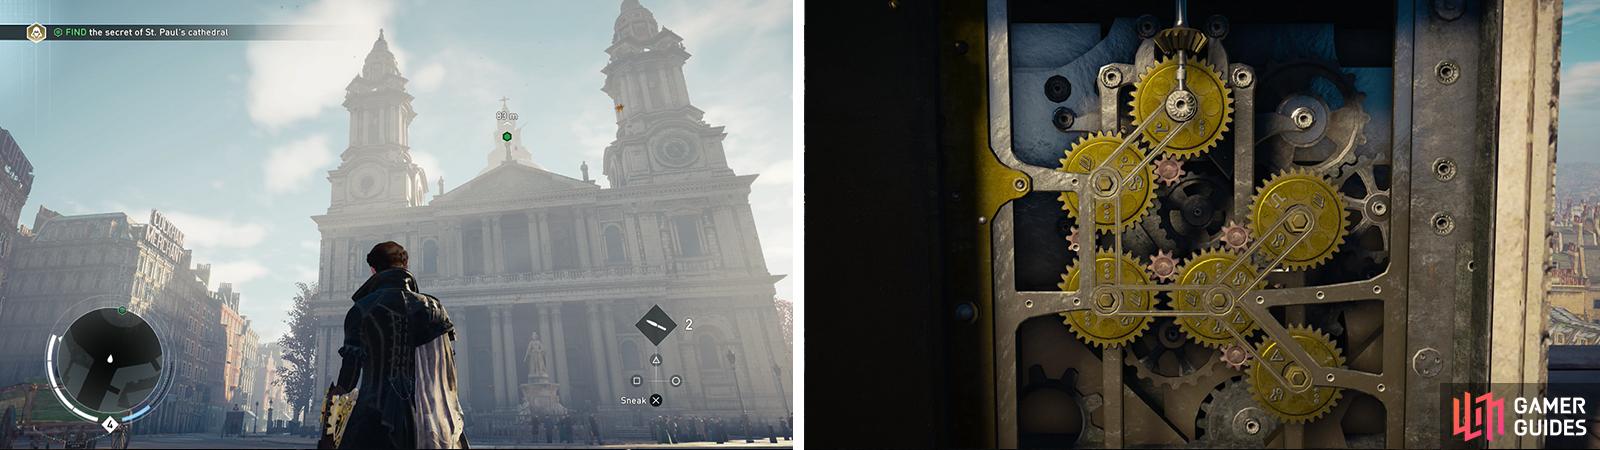 Climb to the top of St. Paul’s (left) to locate a puzzle. Rotate the gears until you reach the solution pictured (right).